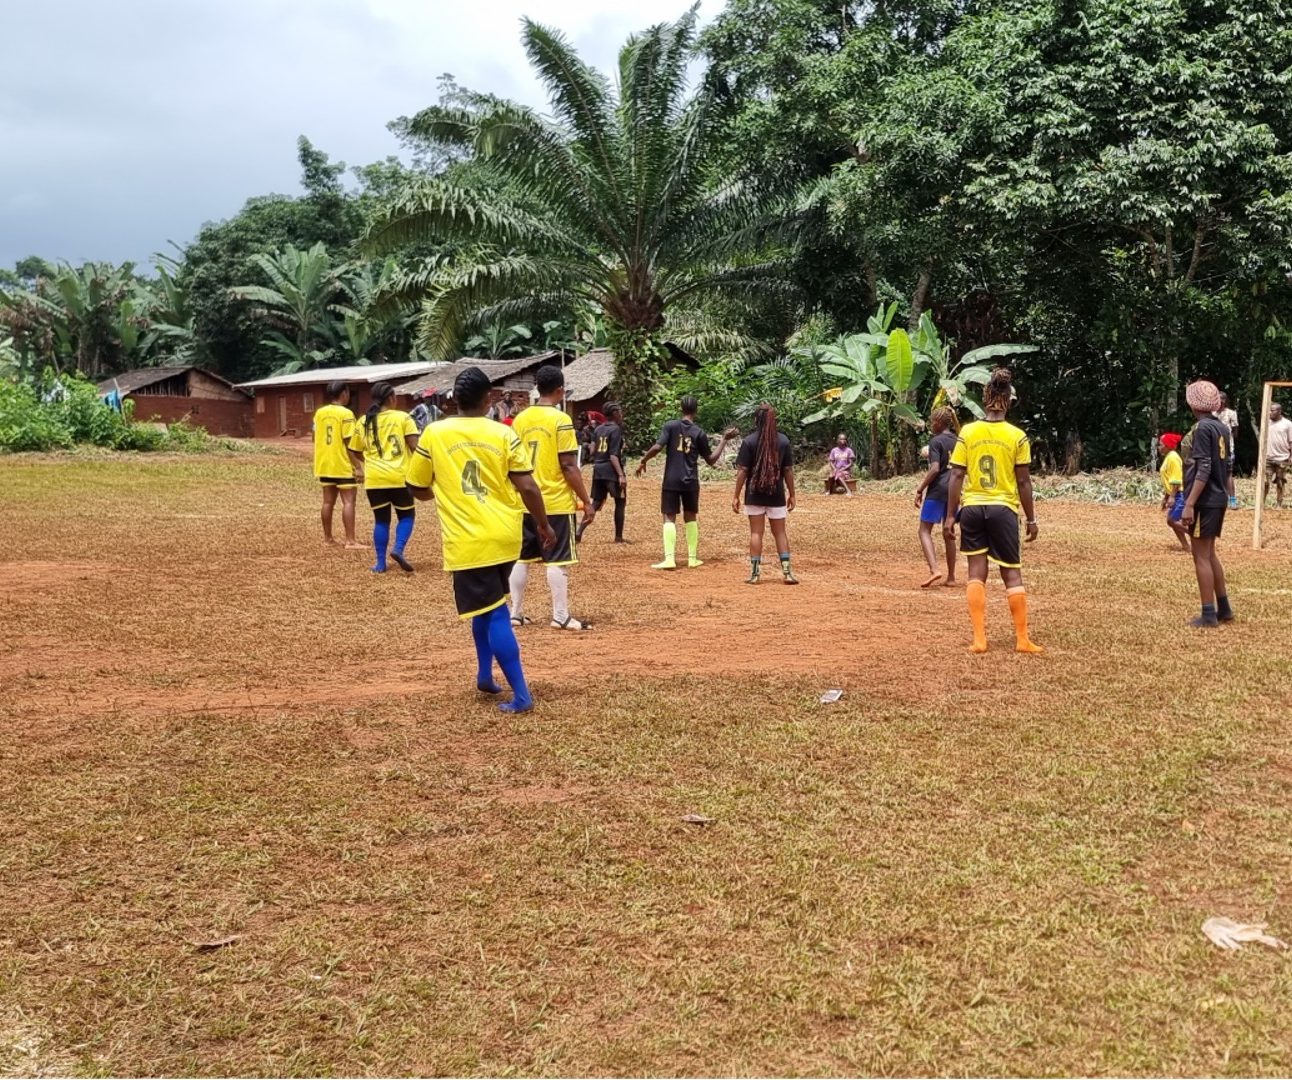 A group of people playing football in Cameroon